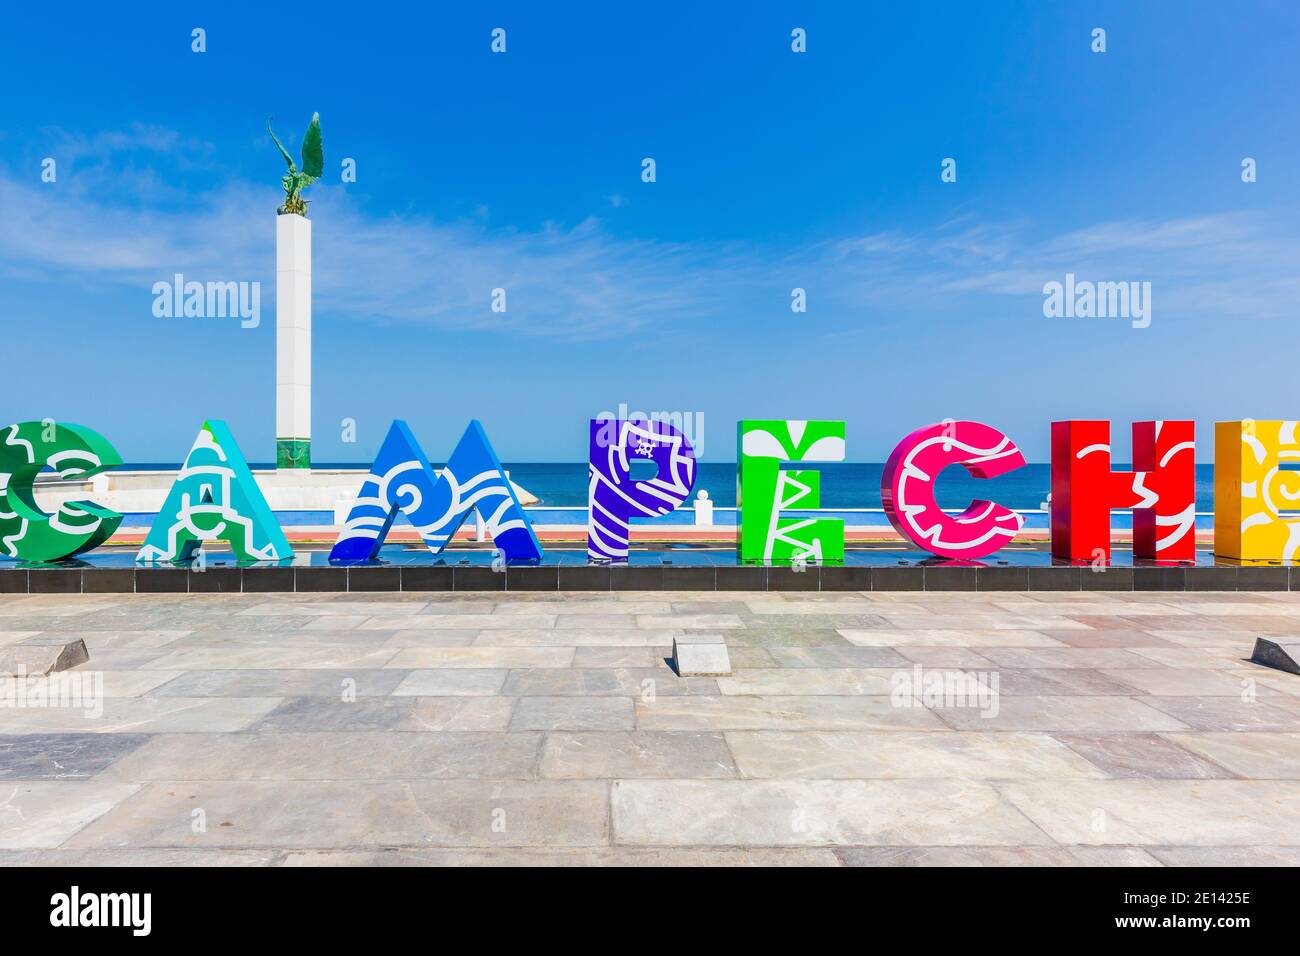 Campeche, Mexico. April 23, 2019: Campeche Seaside town sign. Stock Photo